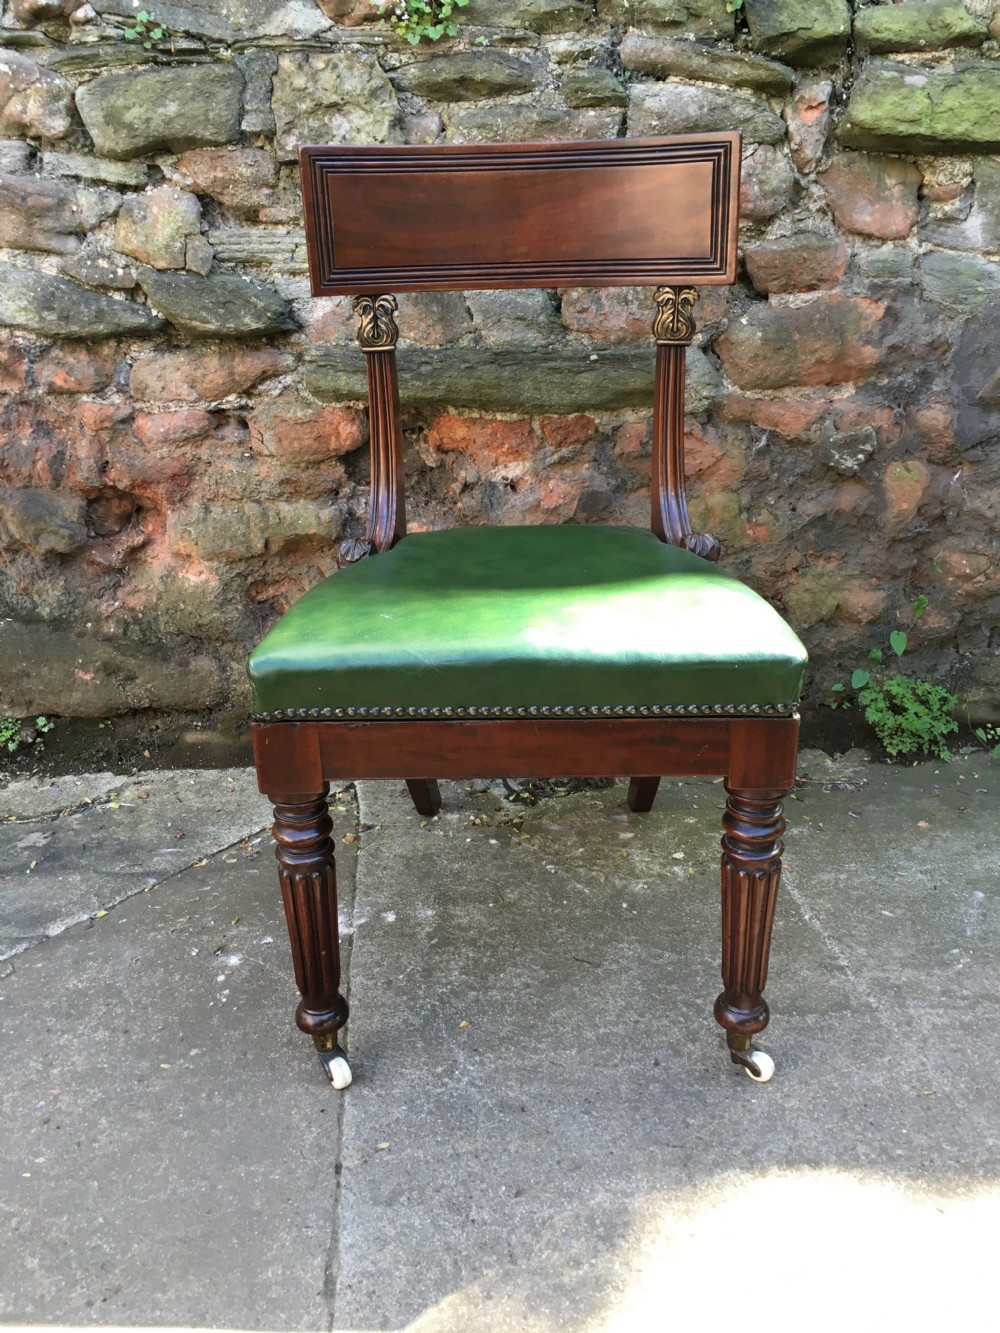 c19th desk chair in the manner of gillows